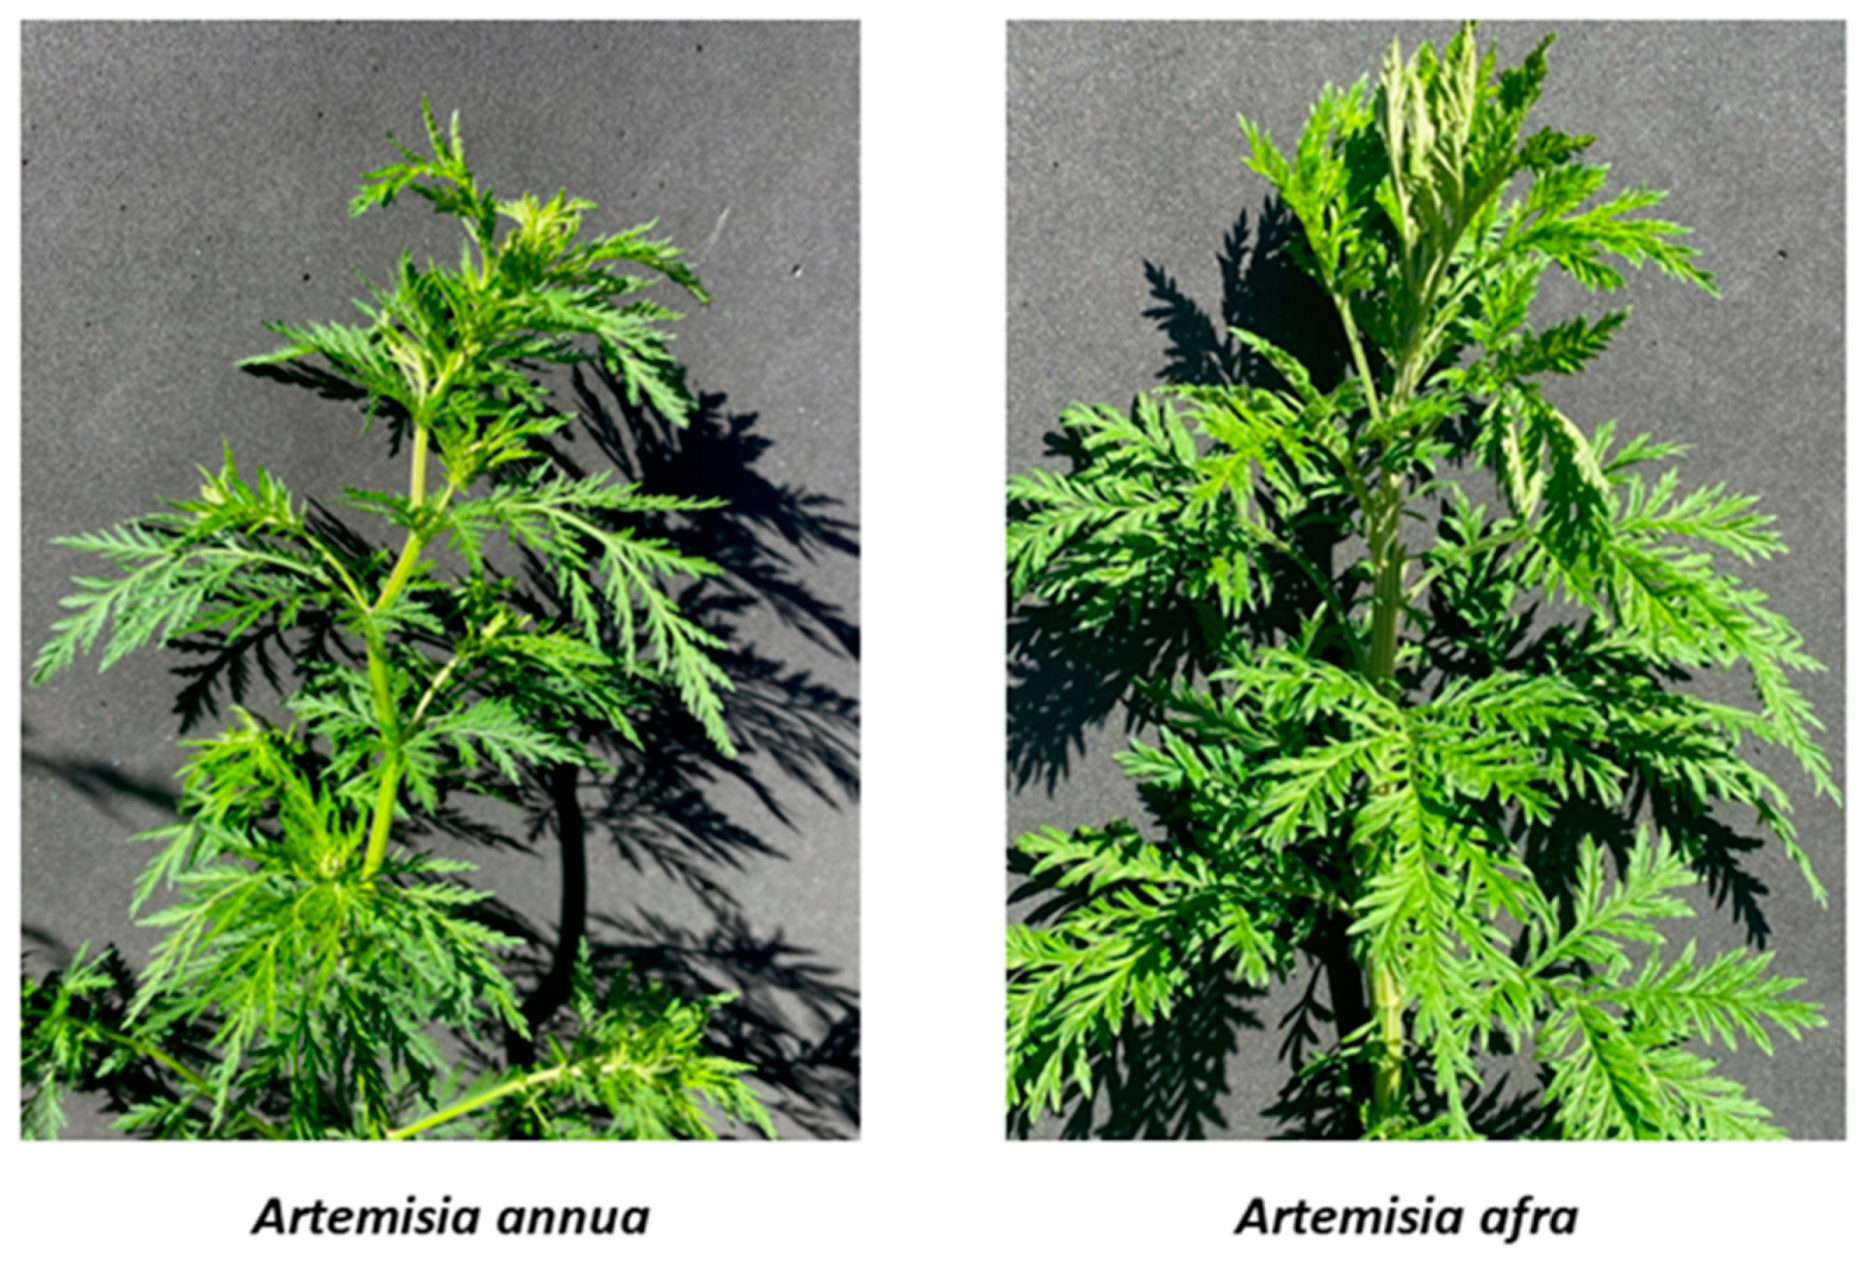 The plant Artemisia annua (adapted from Picture Encarta)